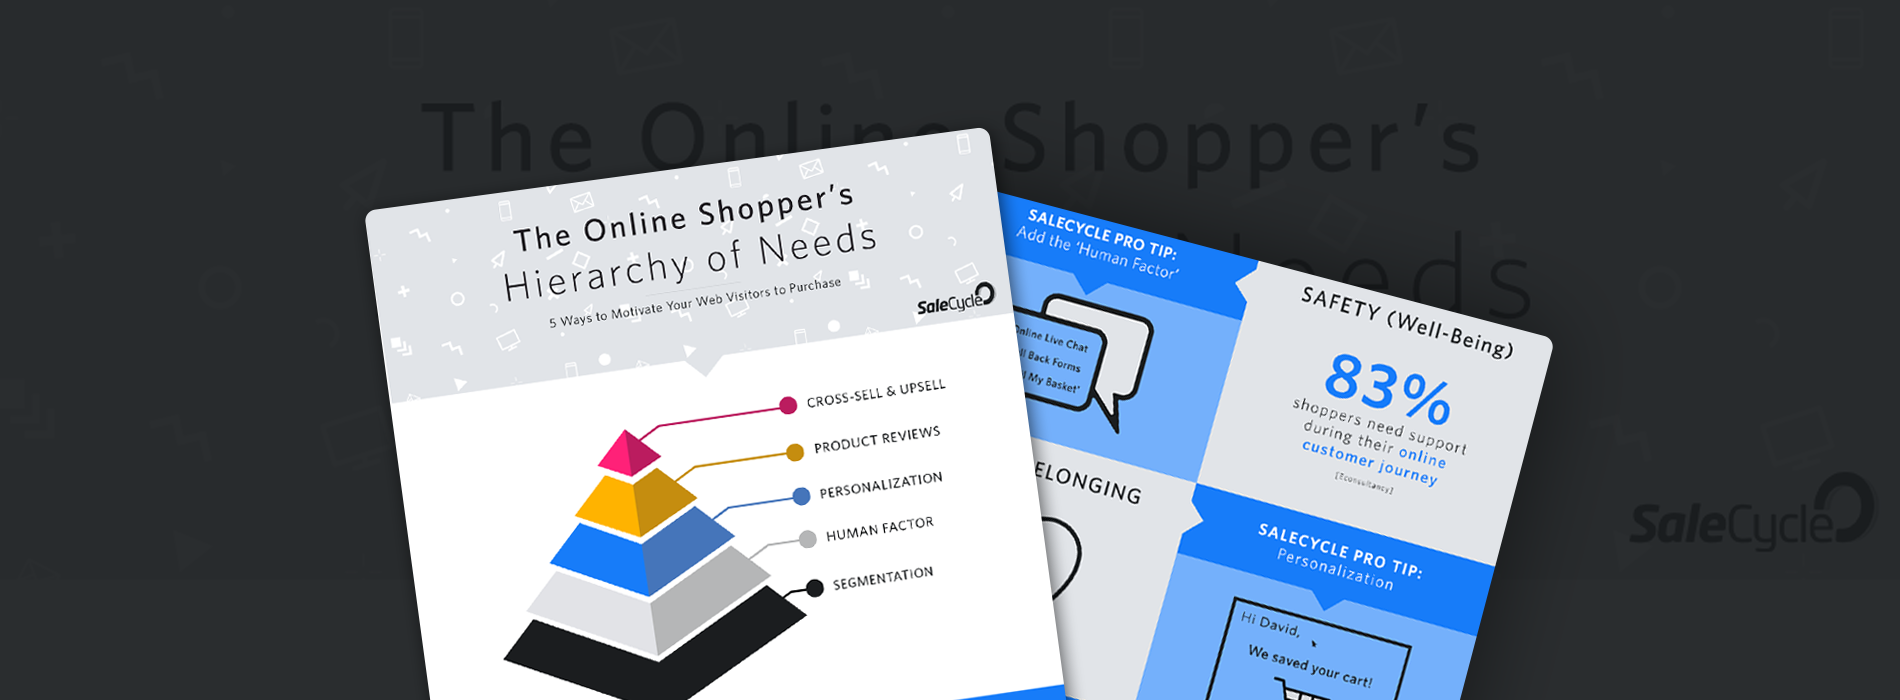 [Infographic] The Online Shopper’s Hierarchy of Needs